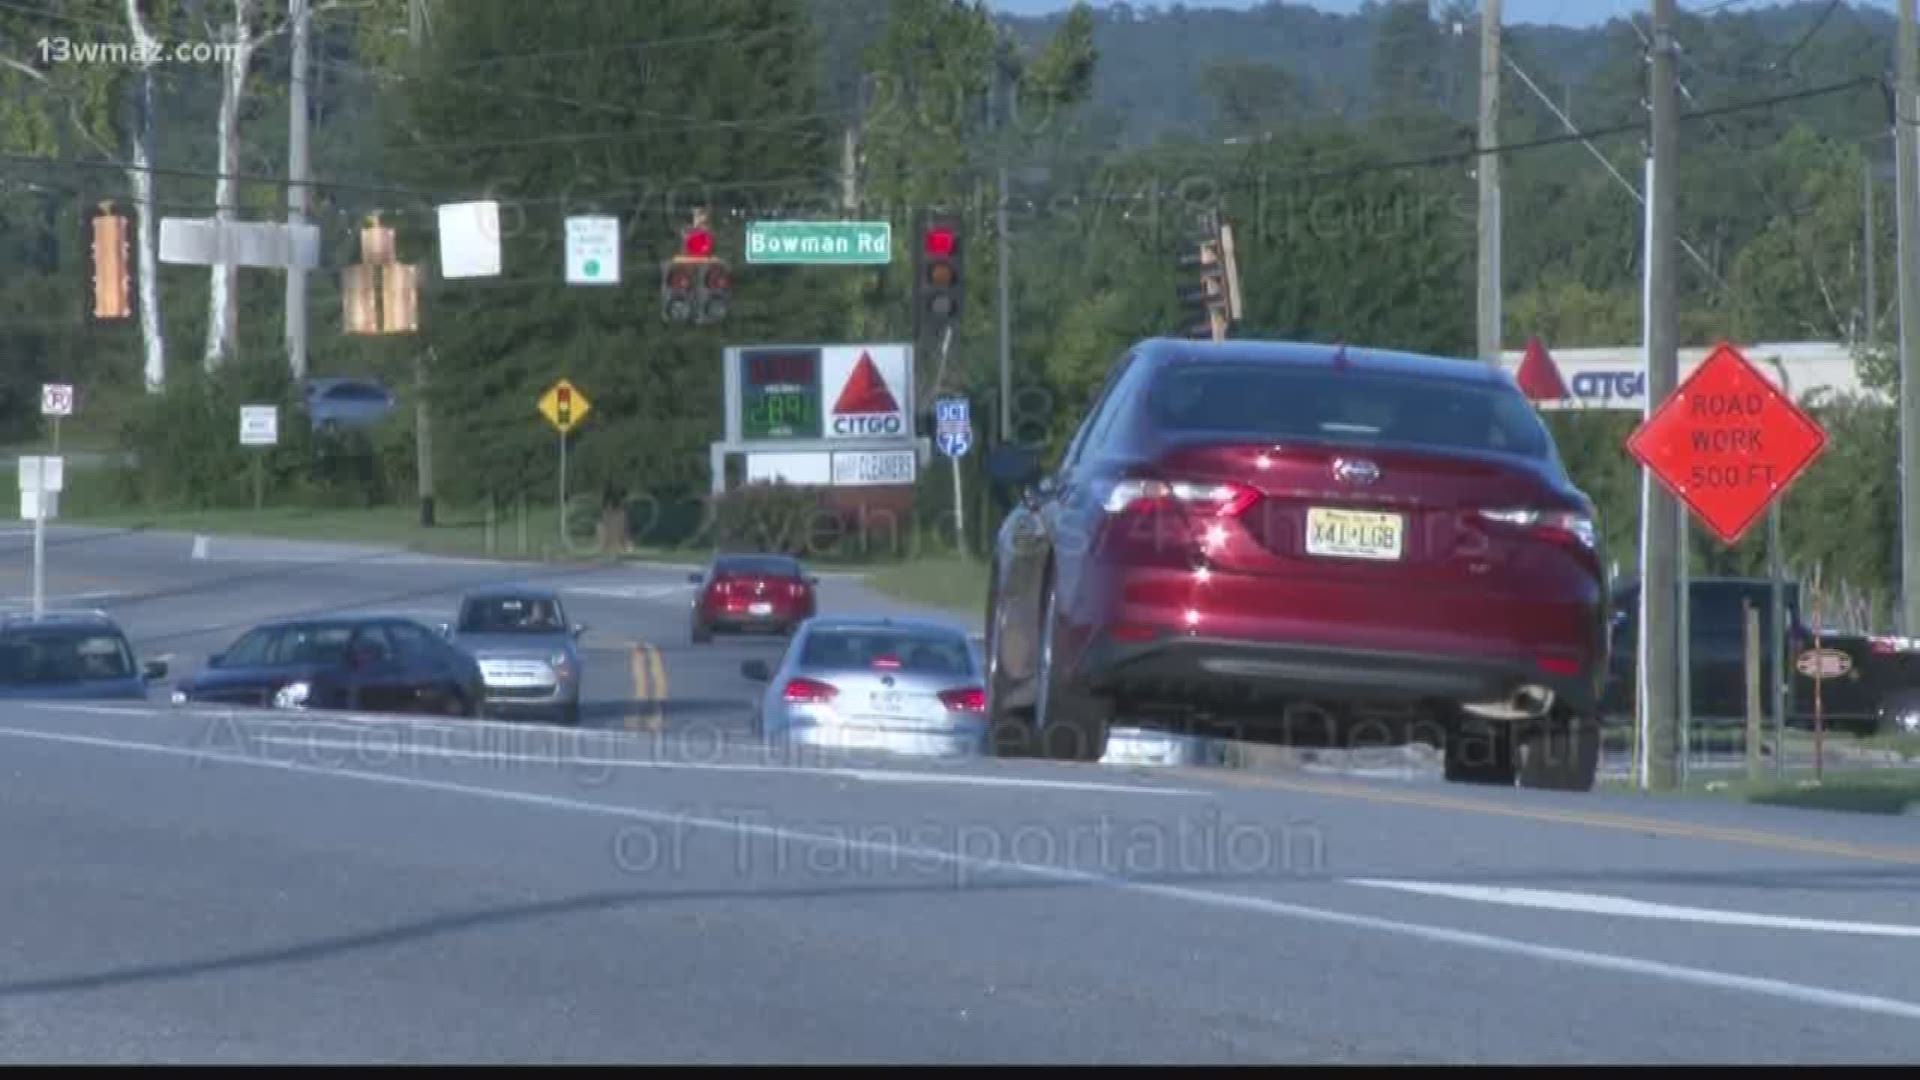 If everything goes well, the Georgia Department of Transportation estimates they would break ground on widening a congested part of Bass Road in about 6 years.